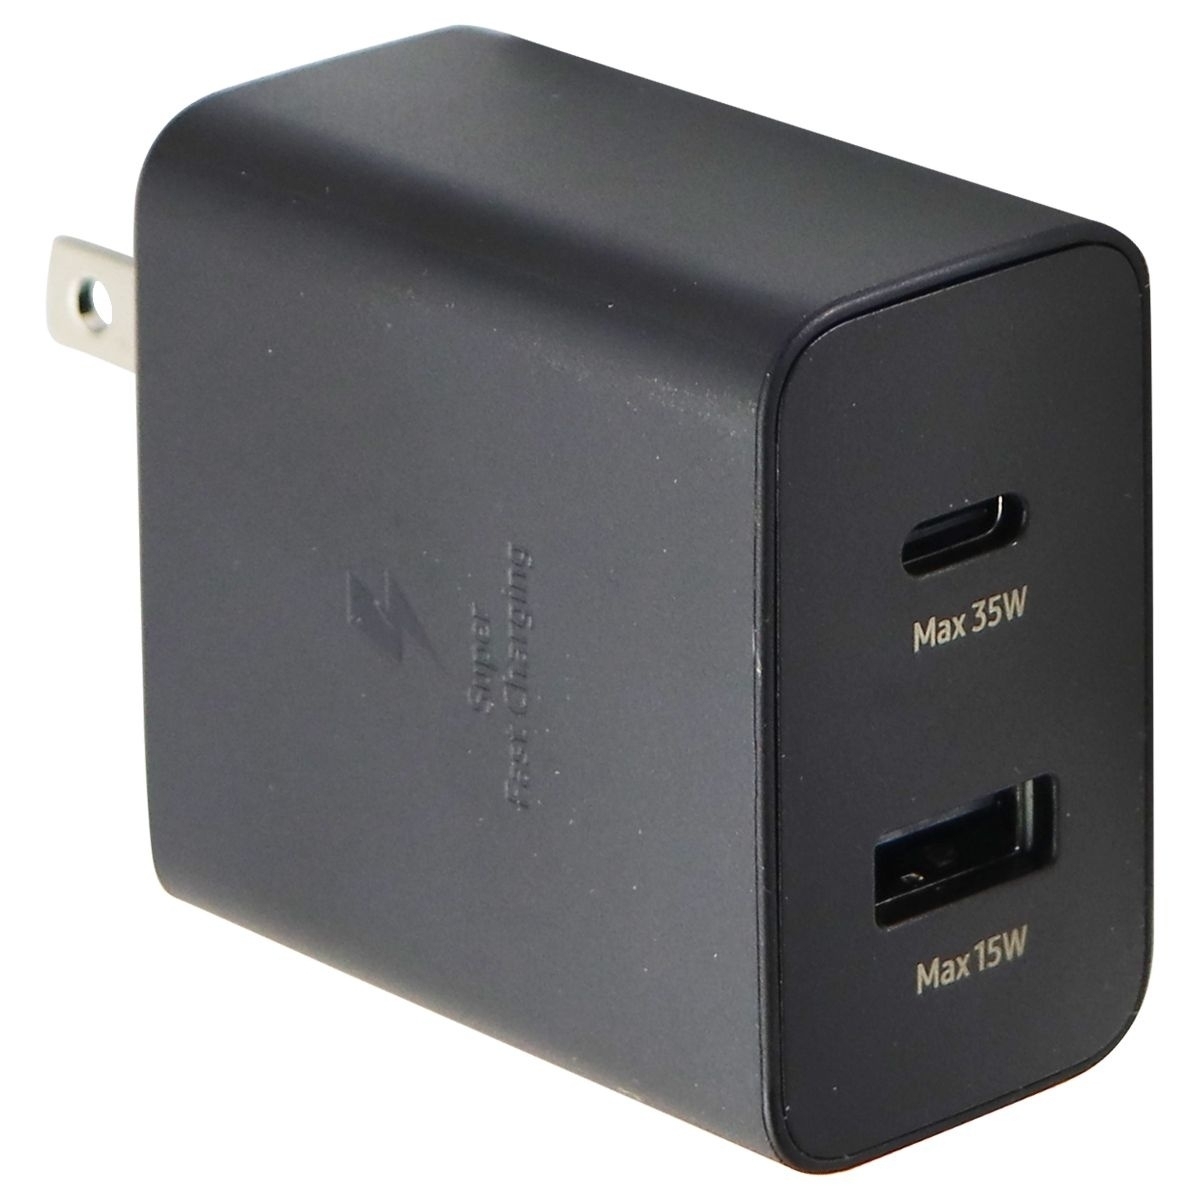 Samsung 35W PD Power Adapter Duo With USB & USB-C Ports - Black